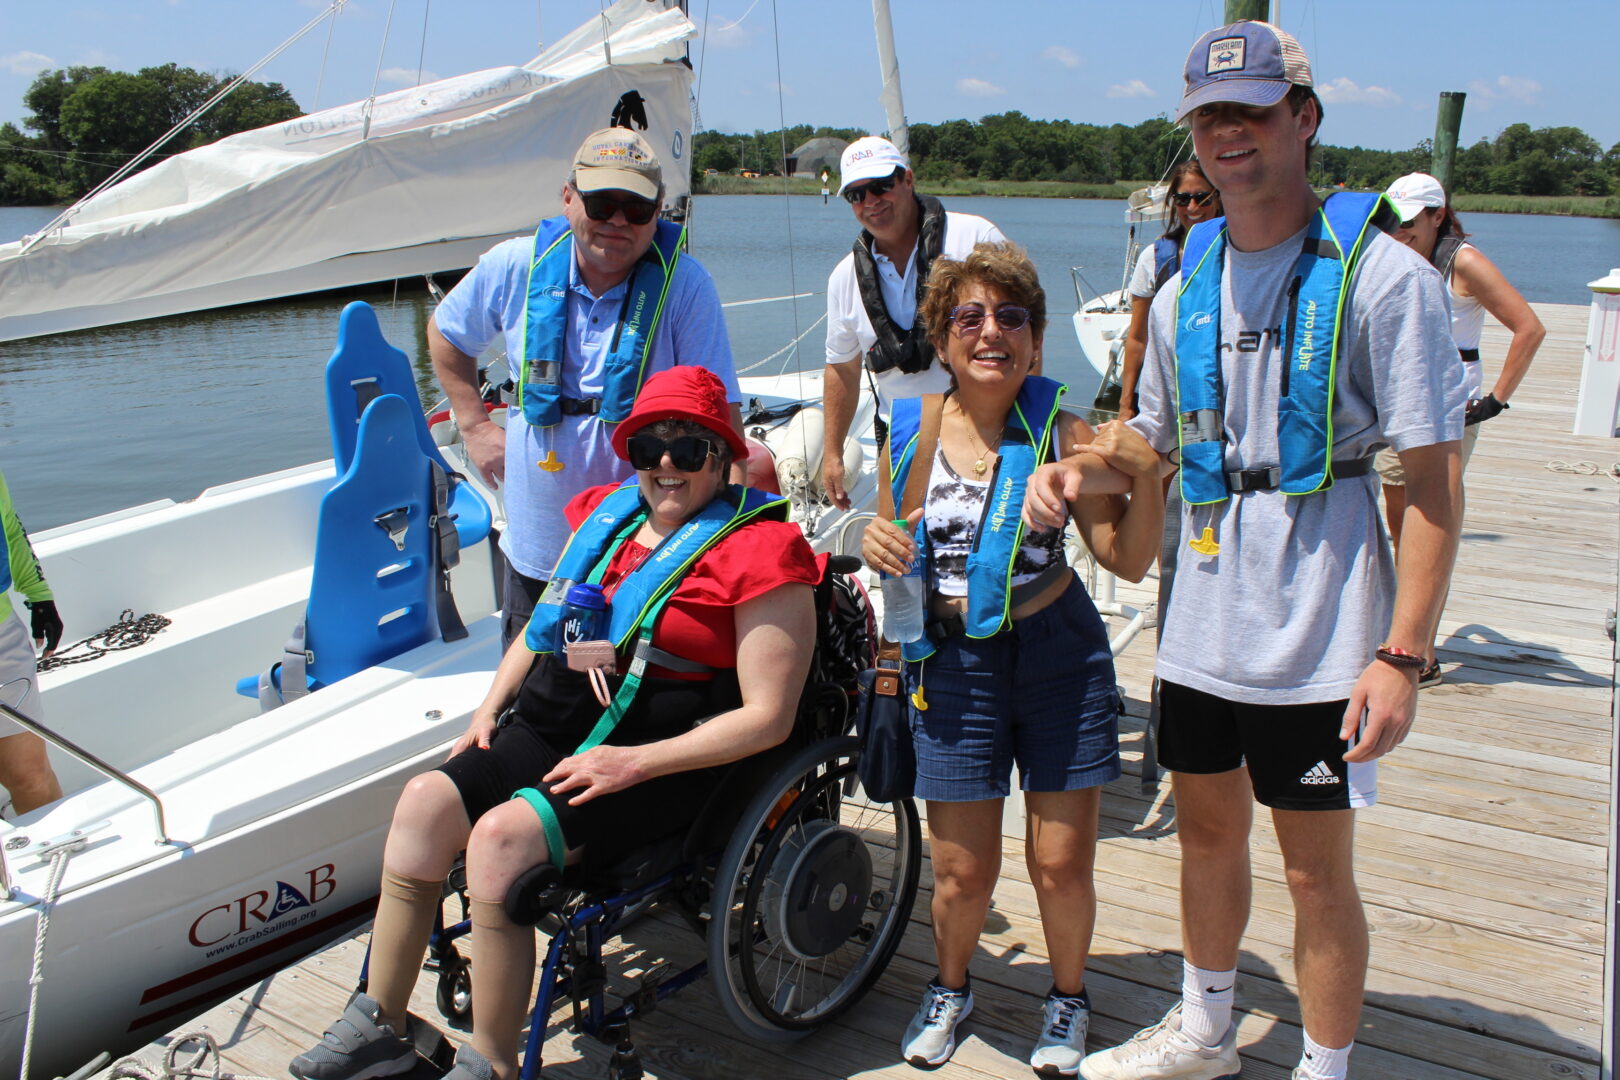 A group photo of 5 individuals, both guests and CRAB volunteers, on the dock next to a CRAB sailboat. 